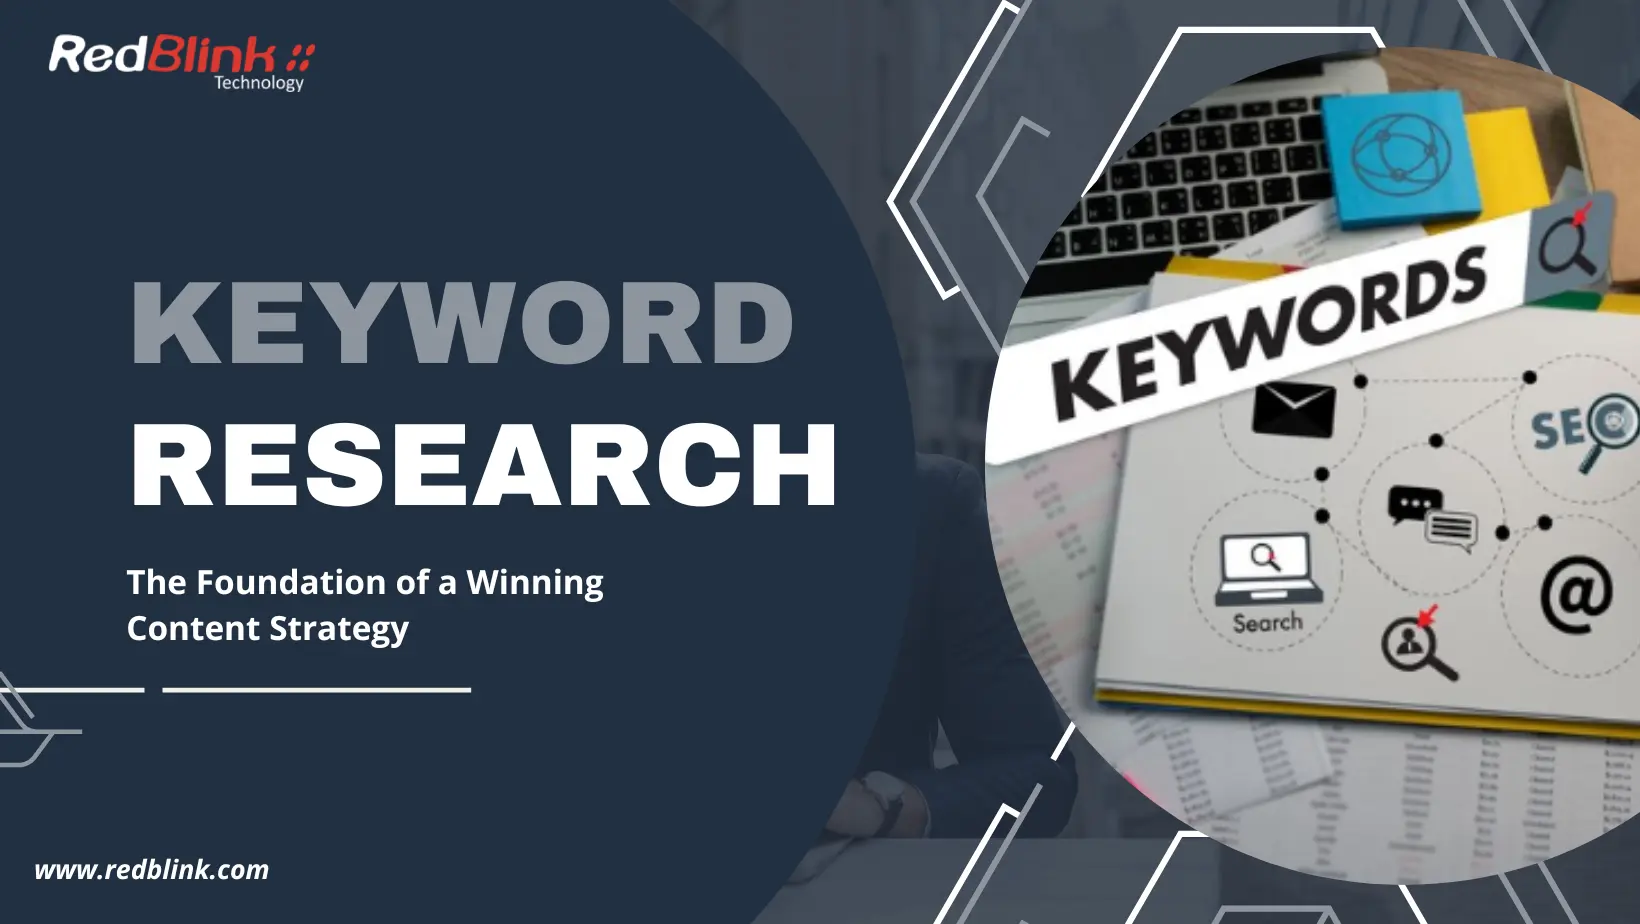 importance of keyword research